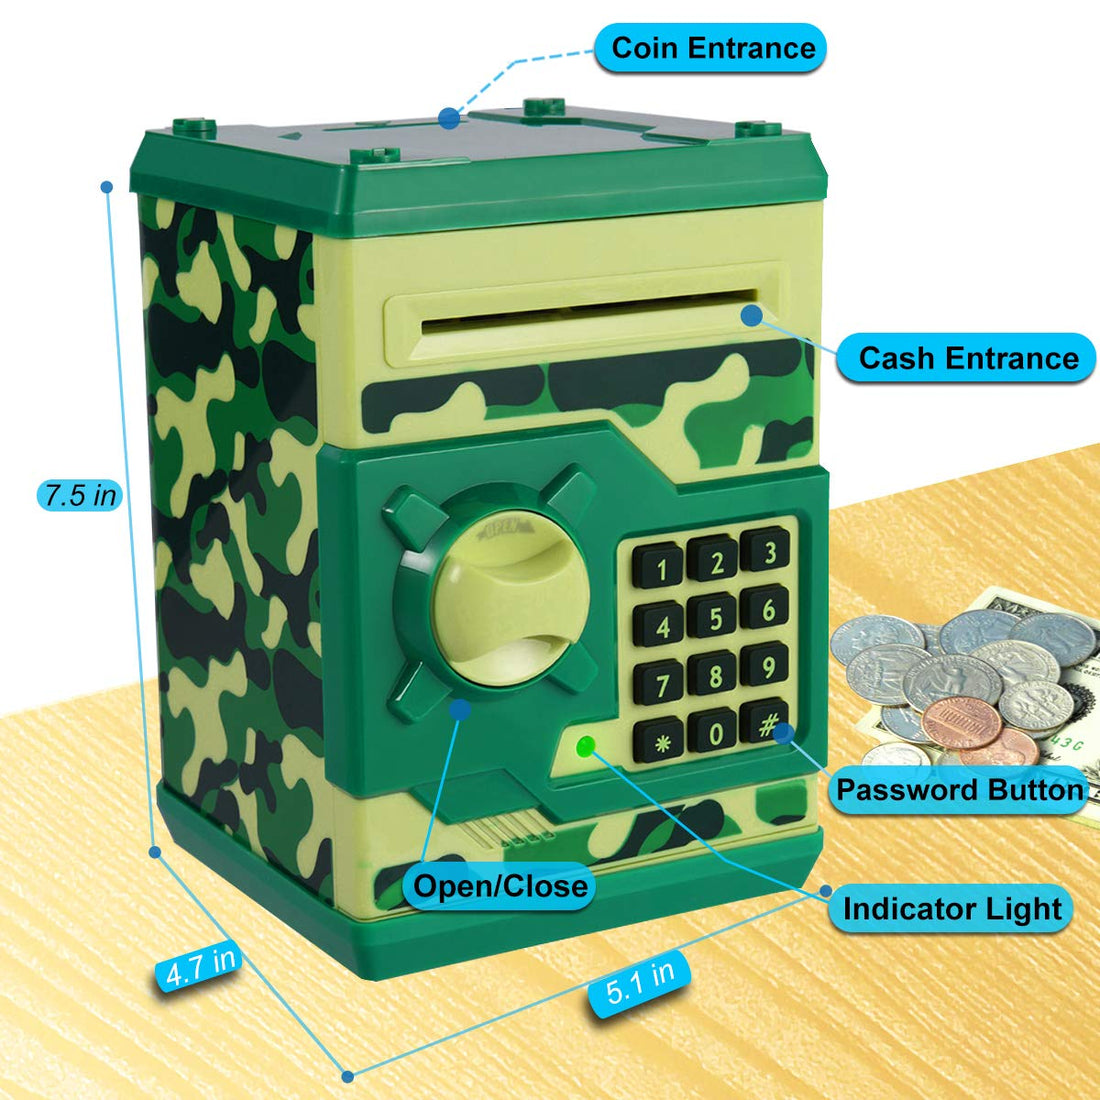 TOPBRY Piggy Bank for Kids,Electronic Password Piggy Bank Kids Safe Bank Mini ATM Piggy Bank Toy for 3-14 Year Old Boys and Girls (Camouflage Green)